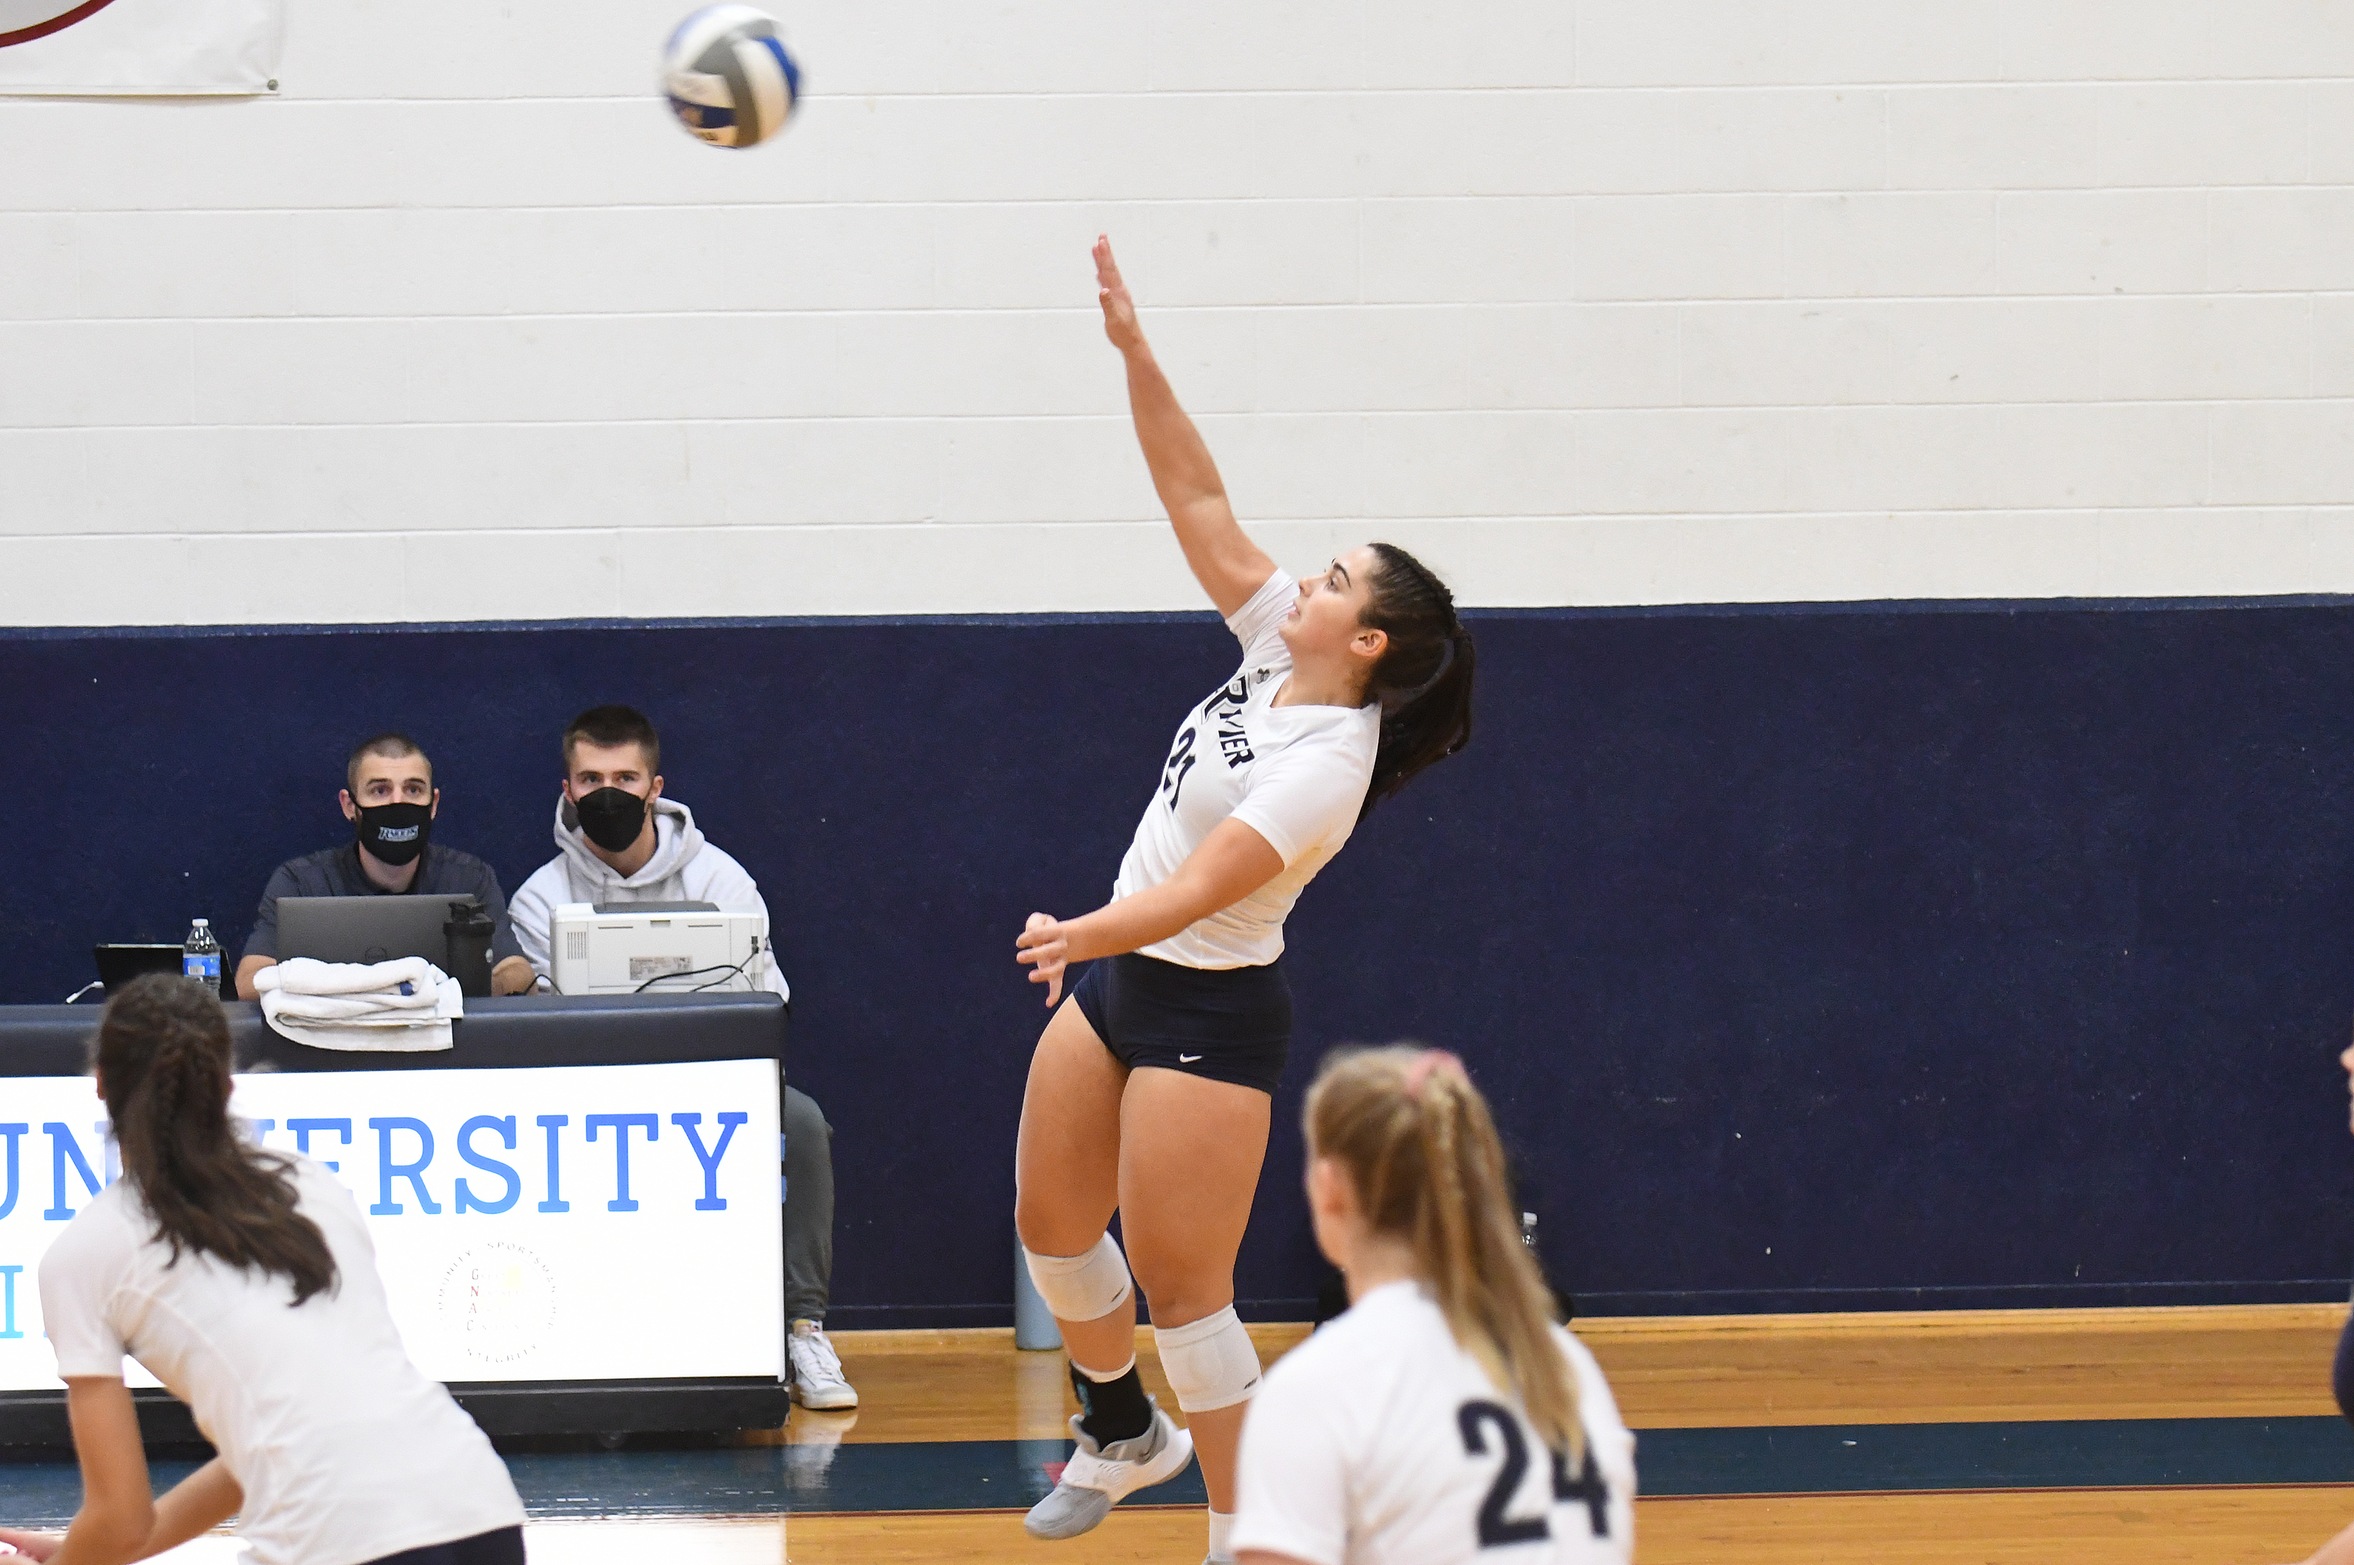 Racevicius’ 17 Kills Lifts Volleyball Over NEC